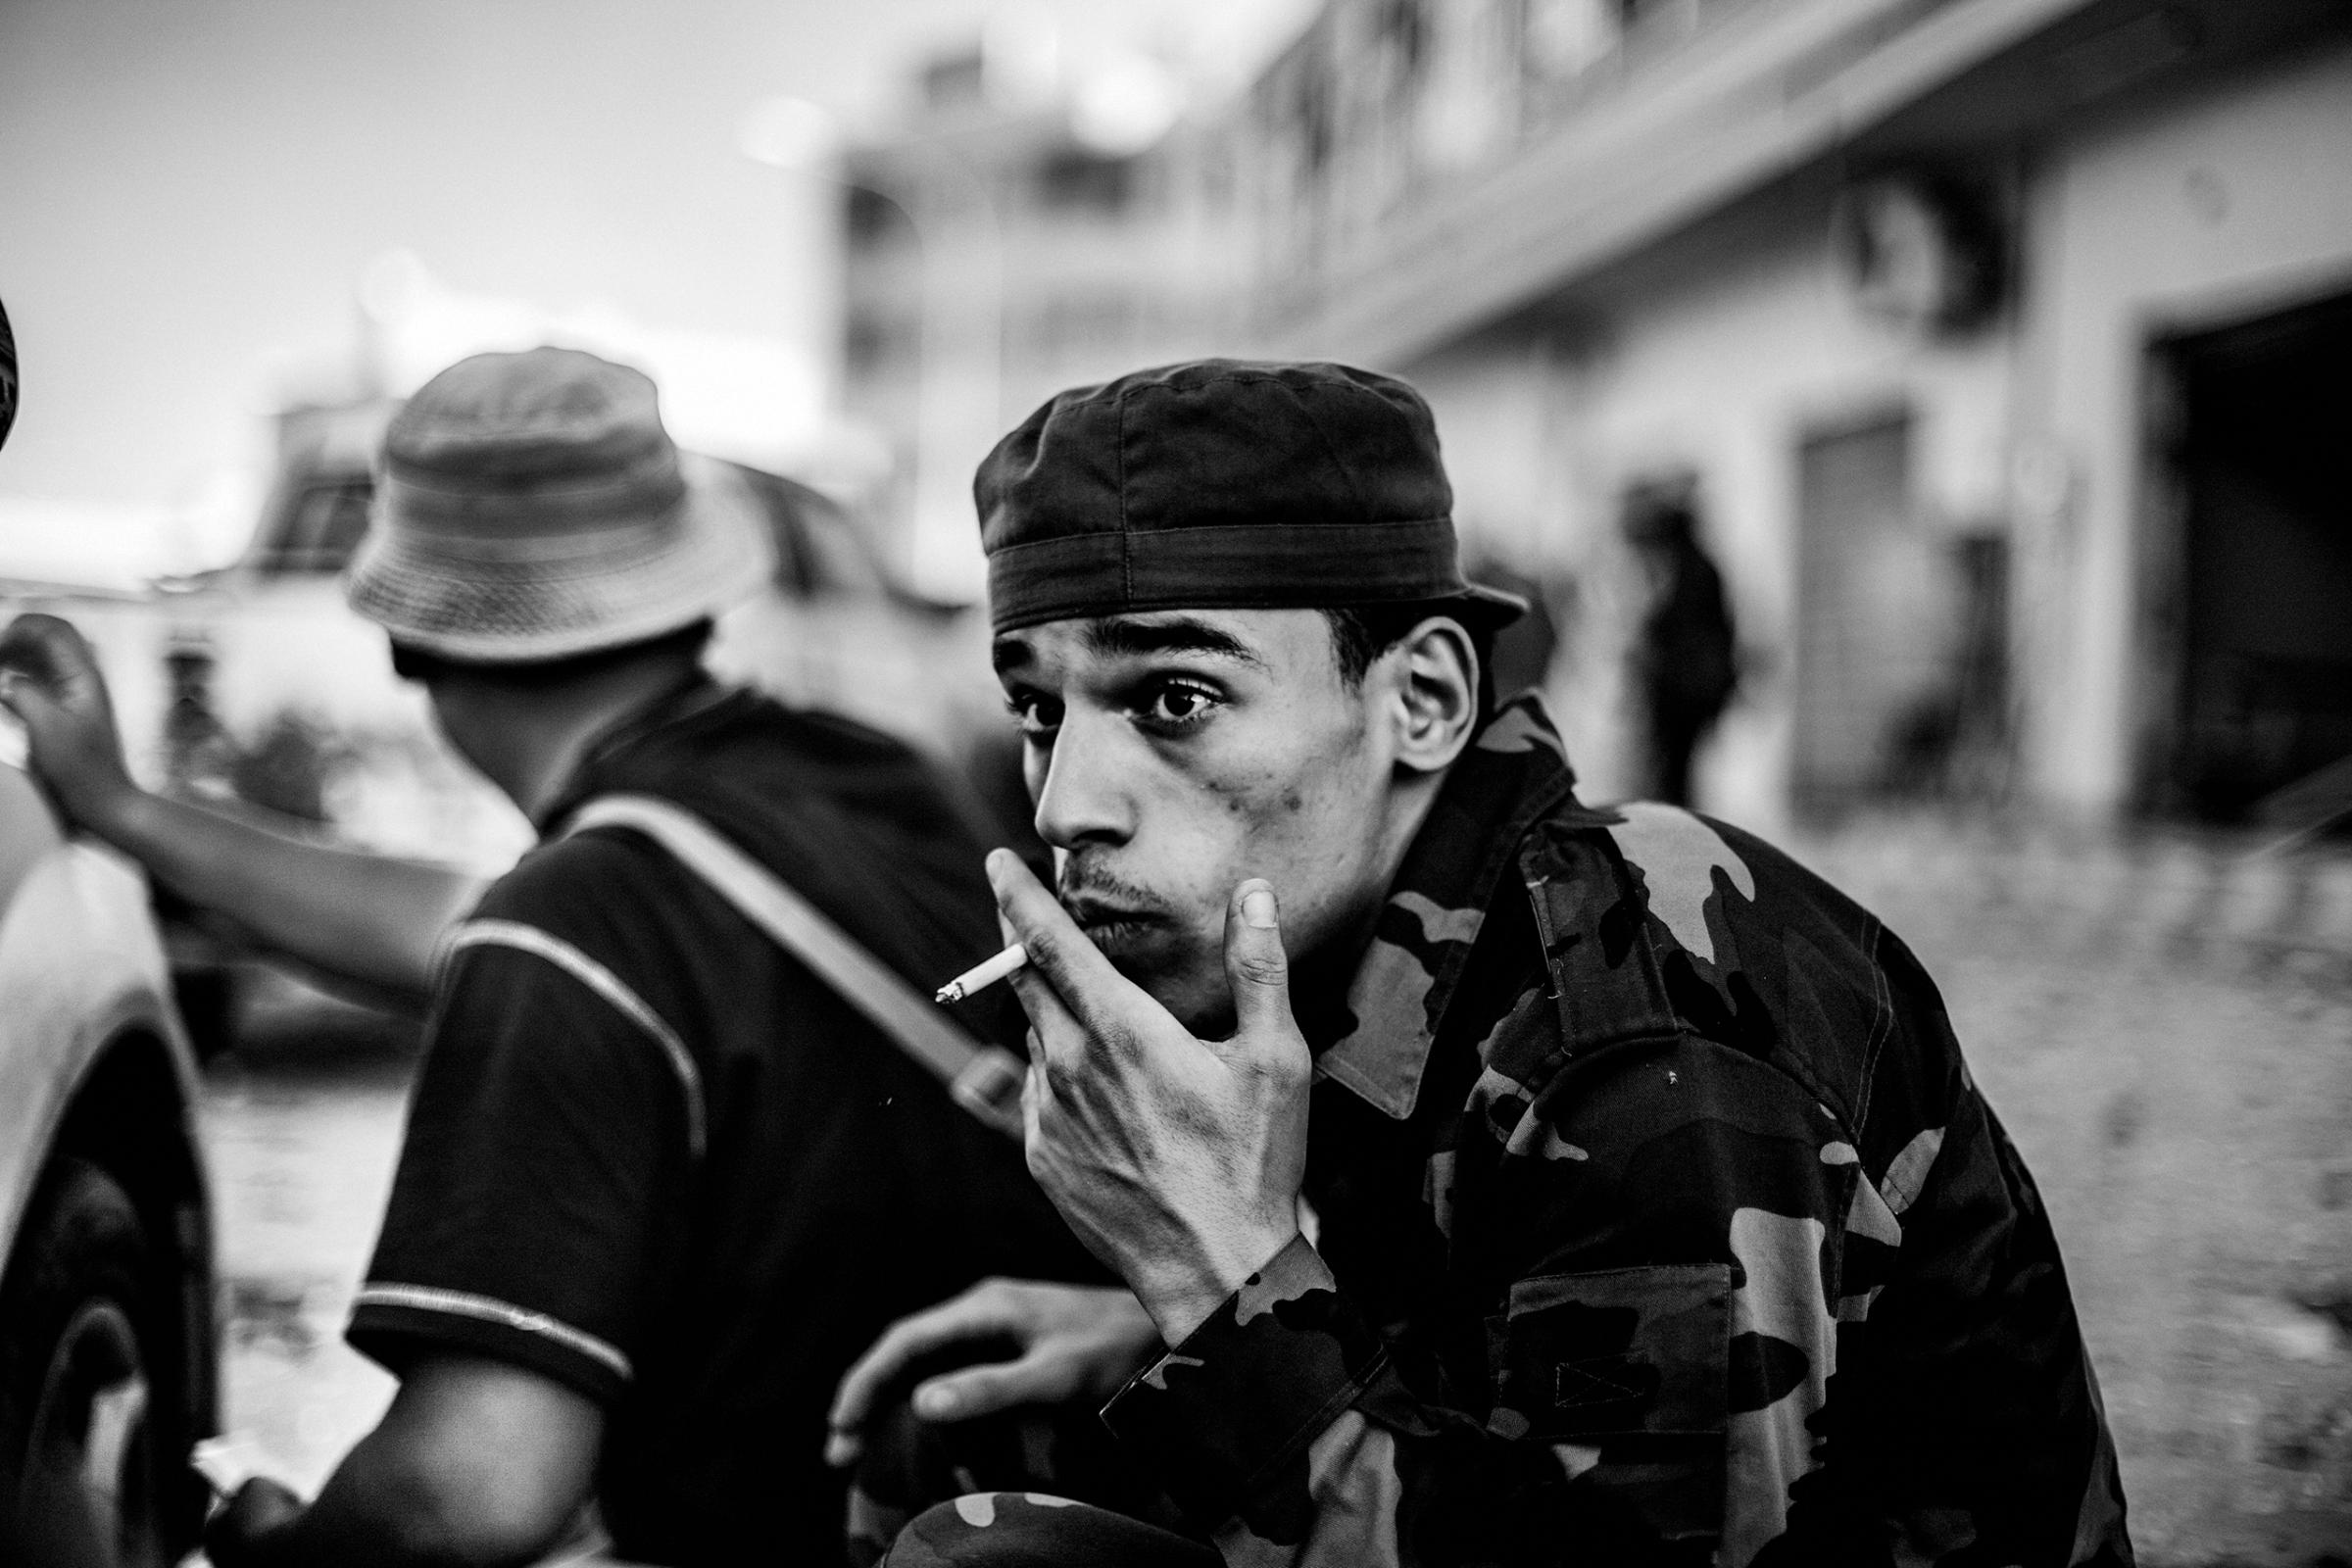 A revolutionary fighter seeks shelter from sniper fire by forces loyal to Muammar Gaddafi, Sirte, Libya, Oct. 12, 2011.